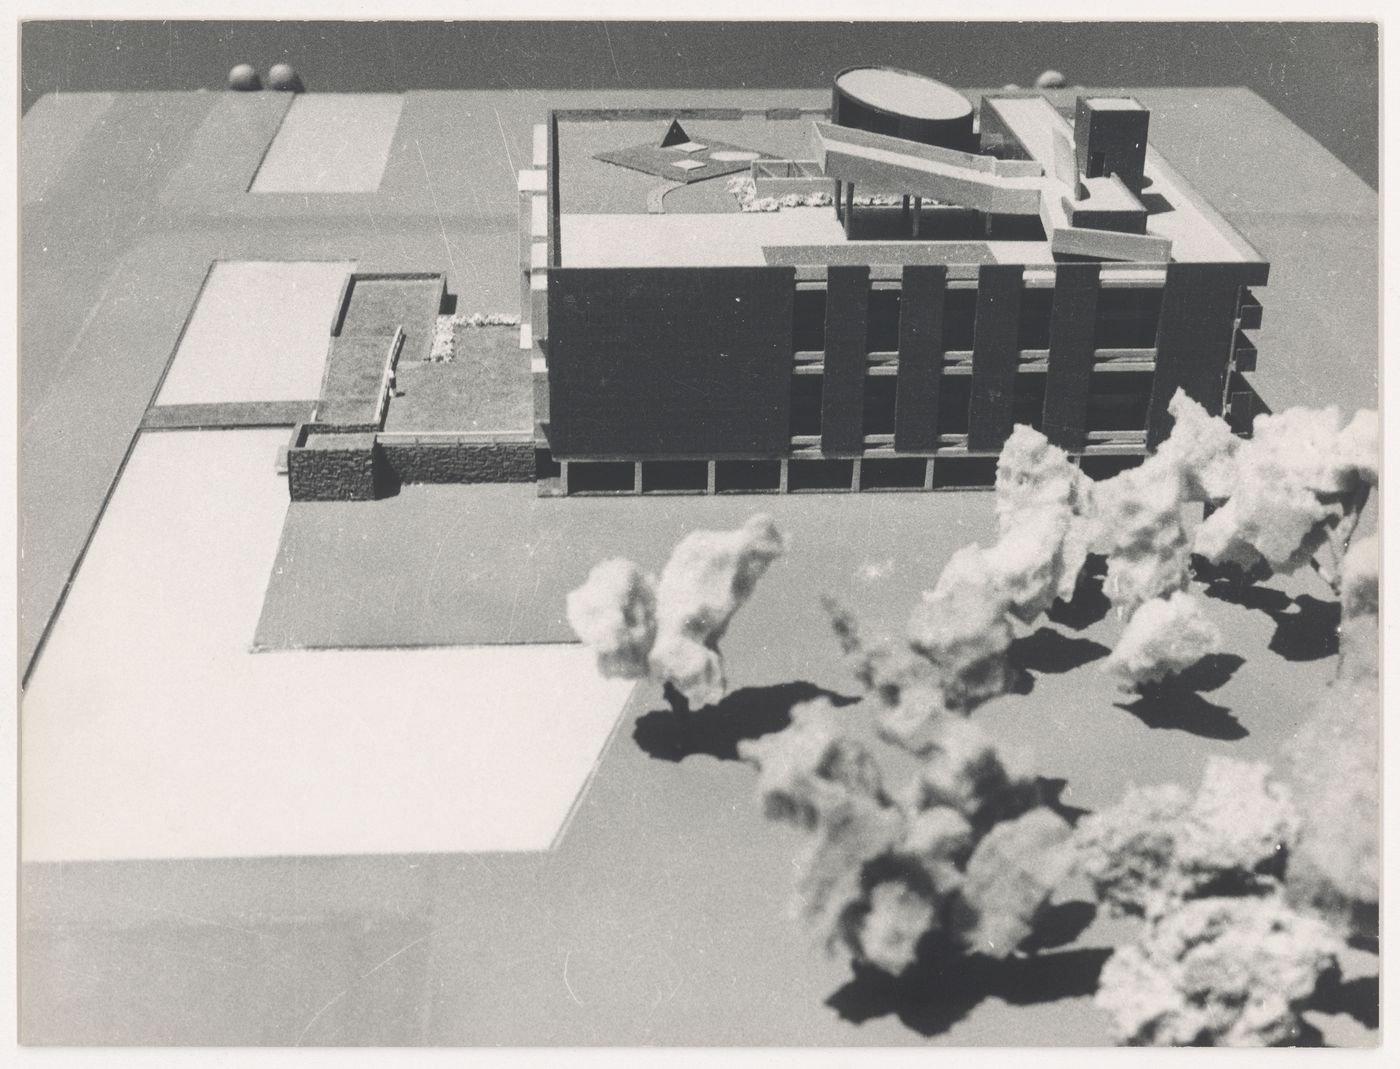 View of the model for University Library, Panjab University, Sector 14, Chandigarh, India